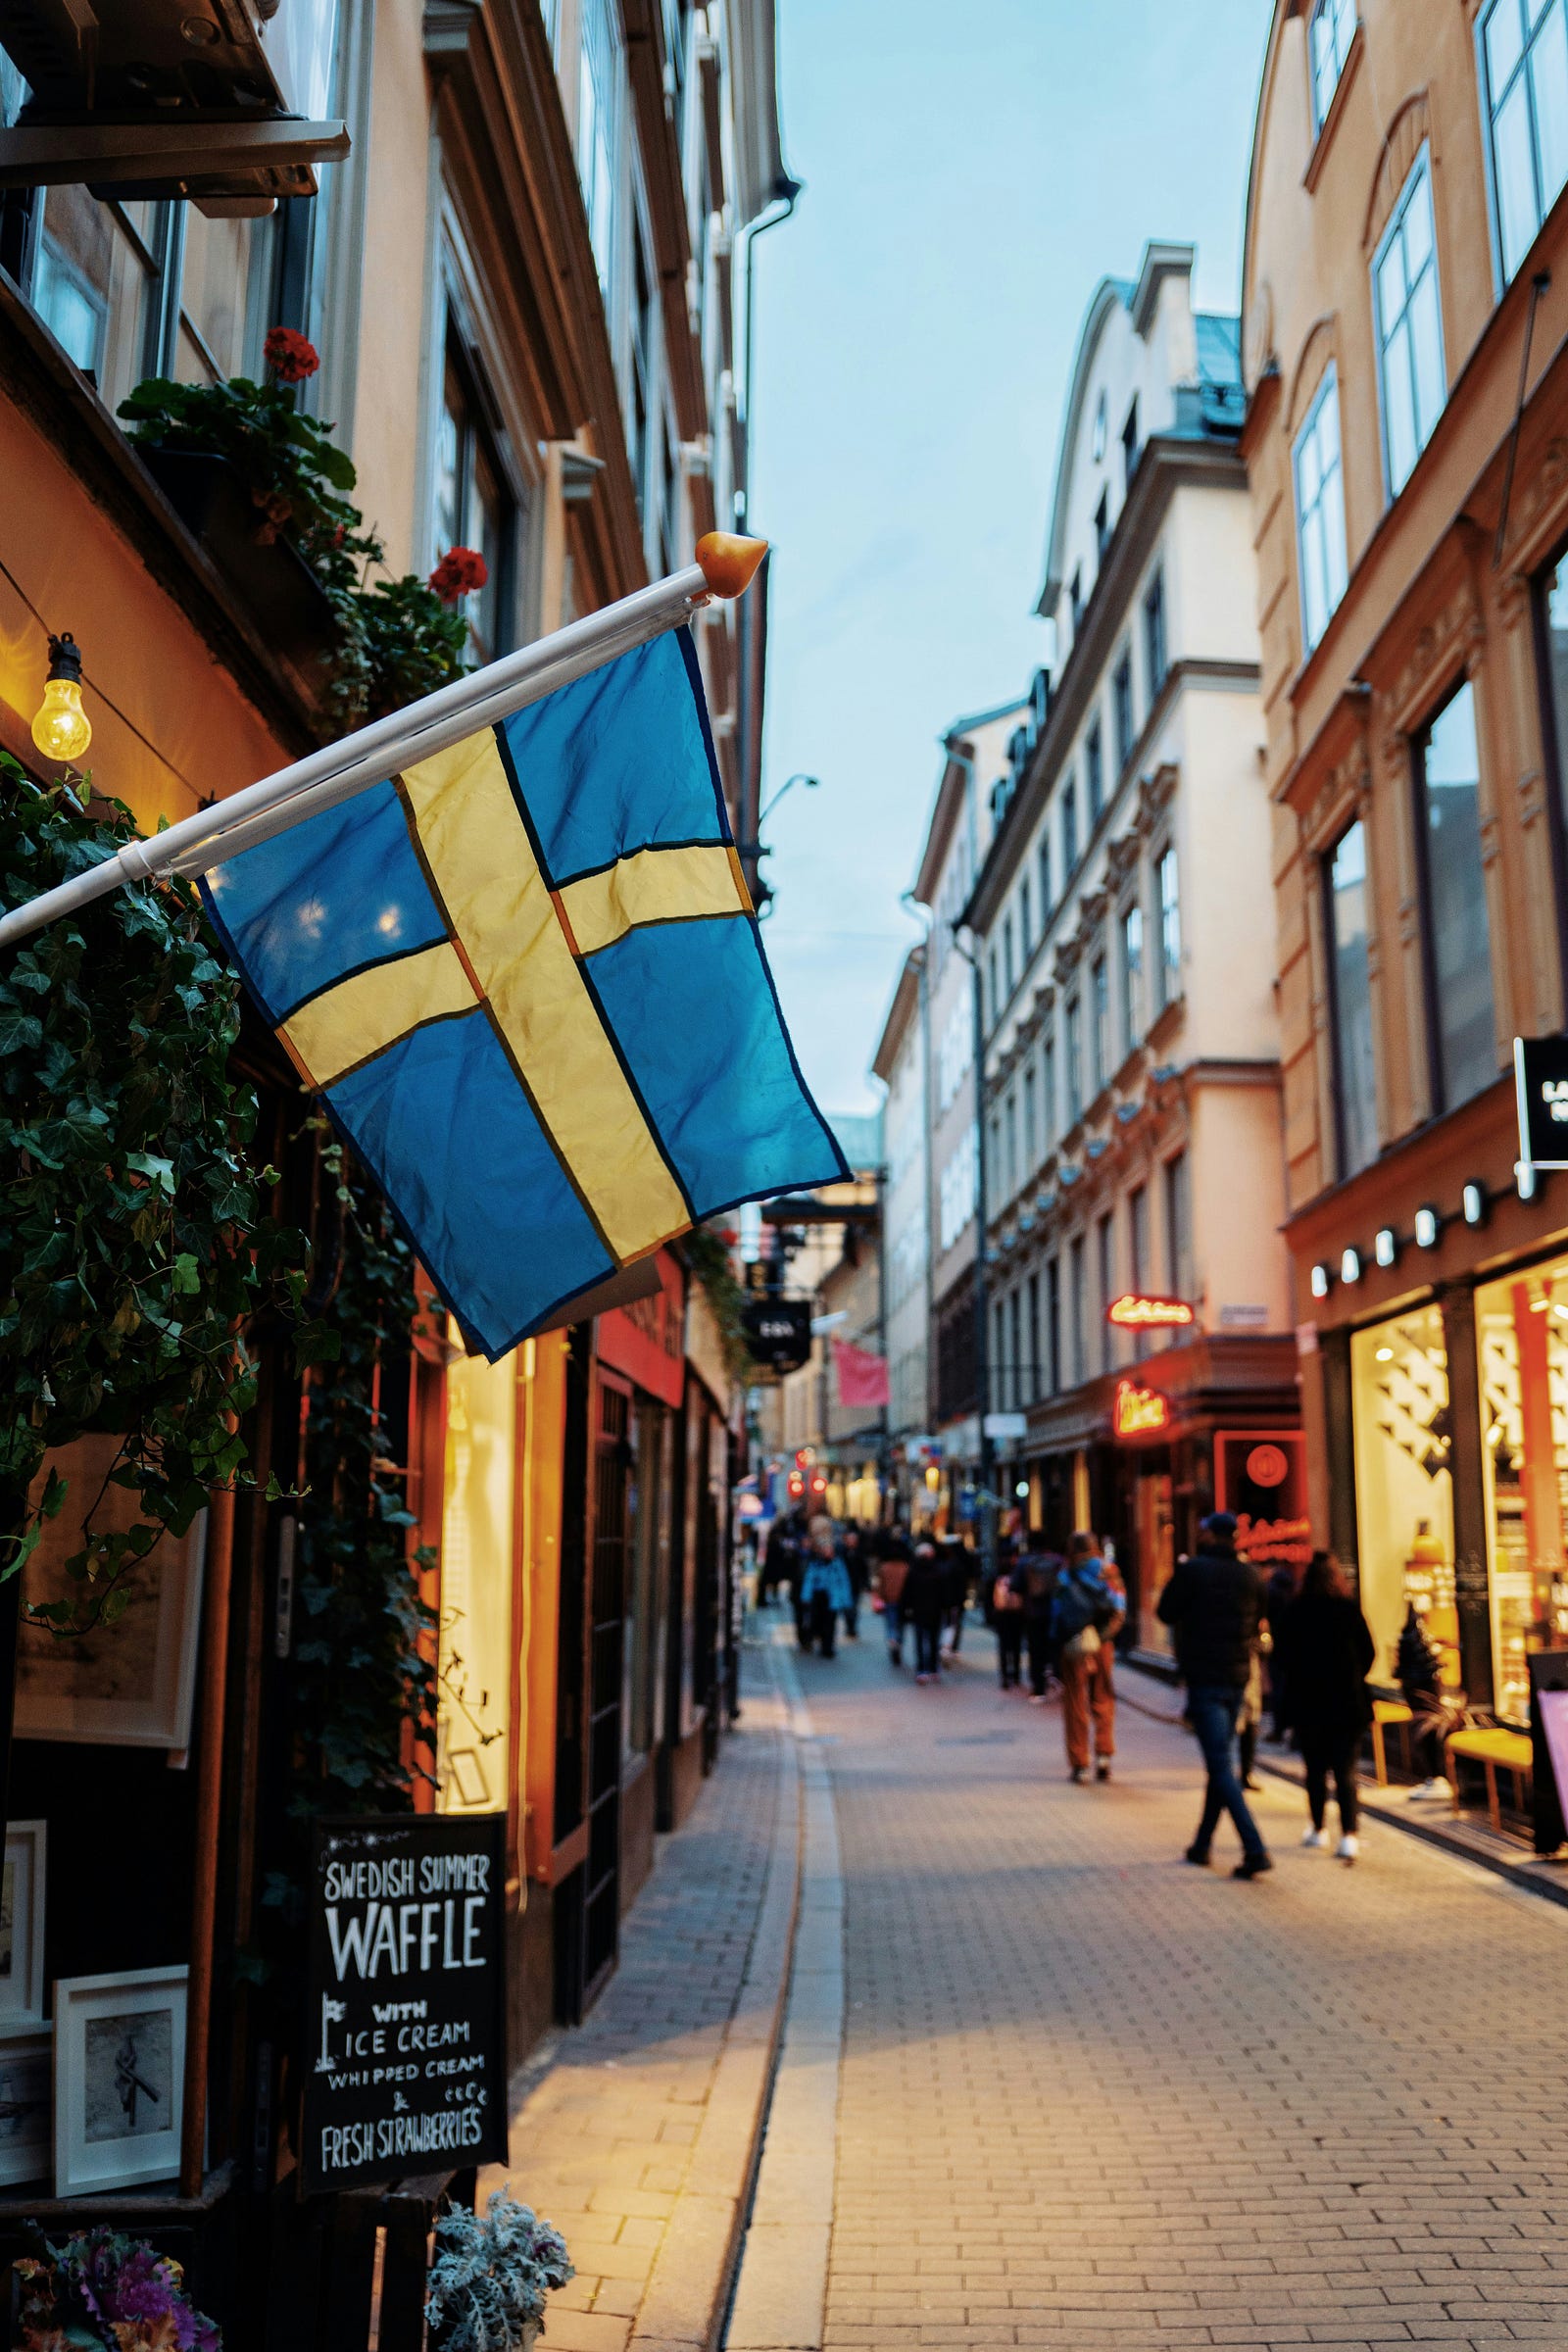 A street scence in Gothenburg (Sweden), the Swedis flag hangin off a building in the foreground.